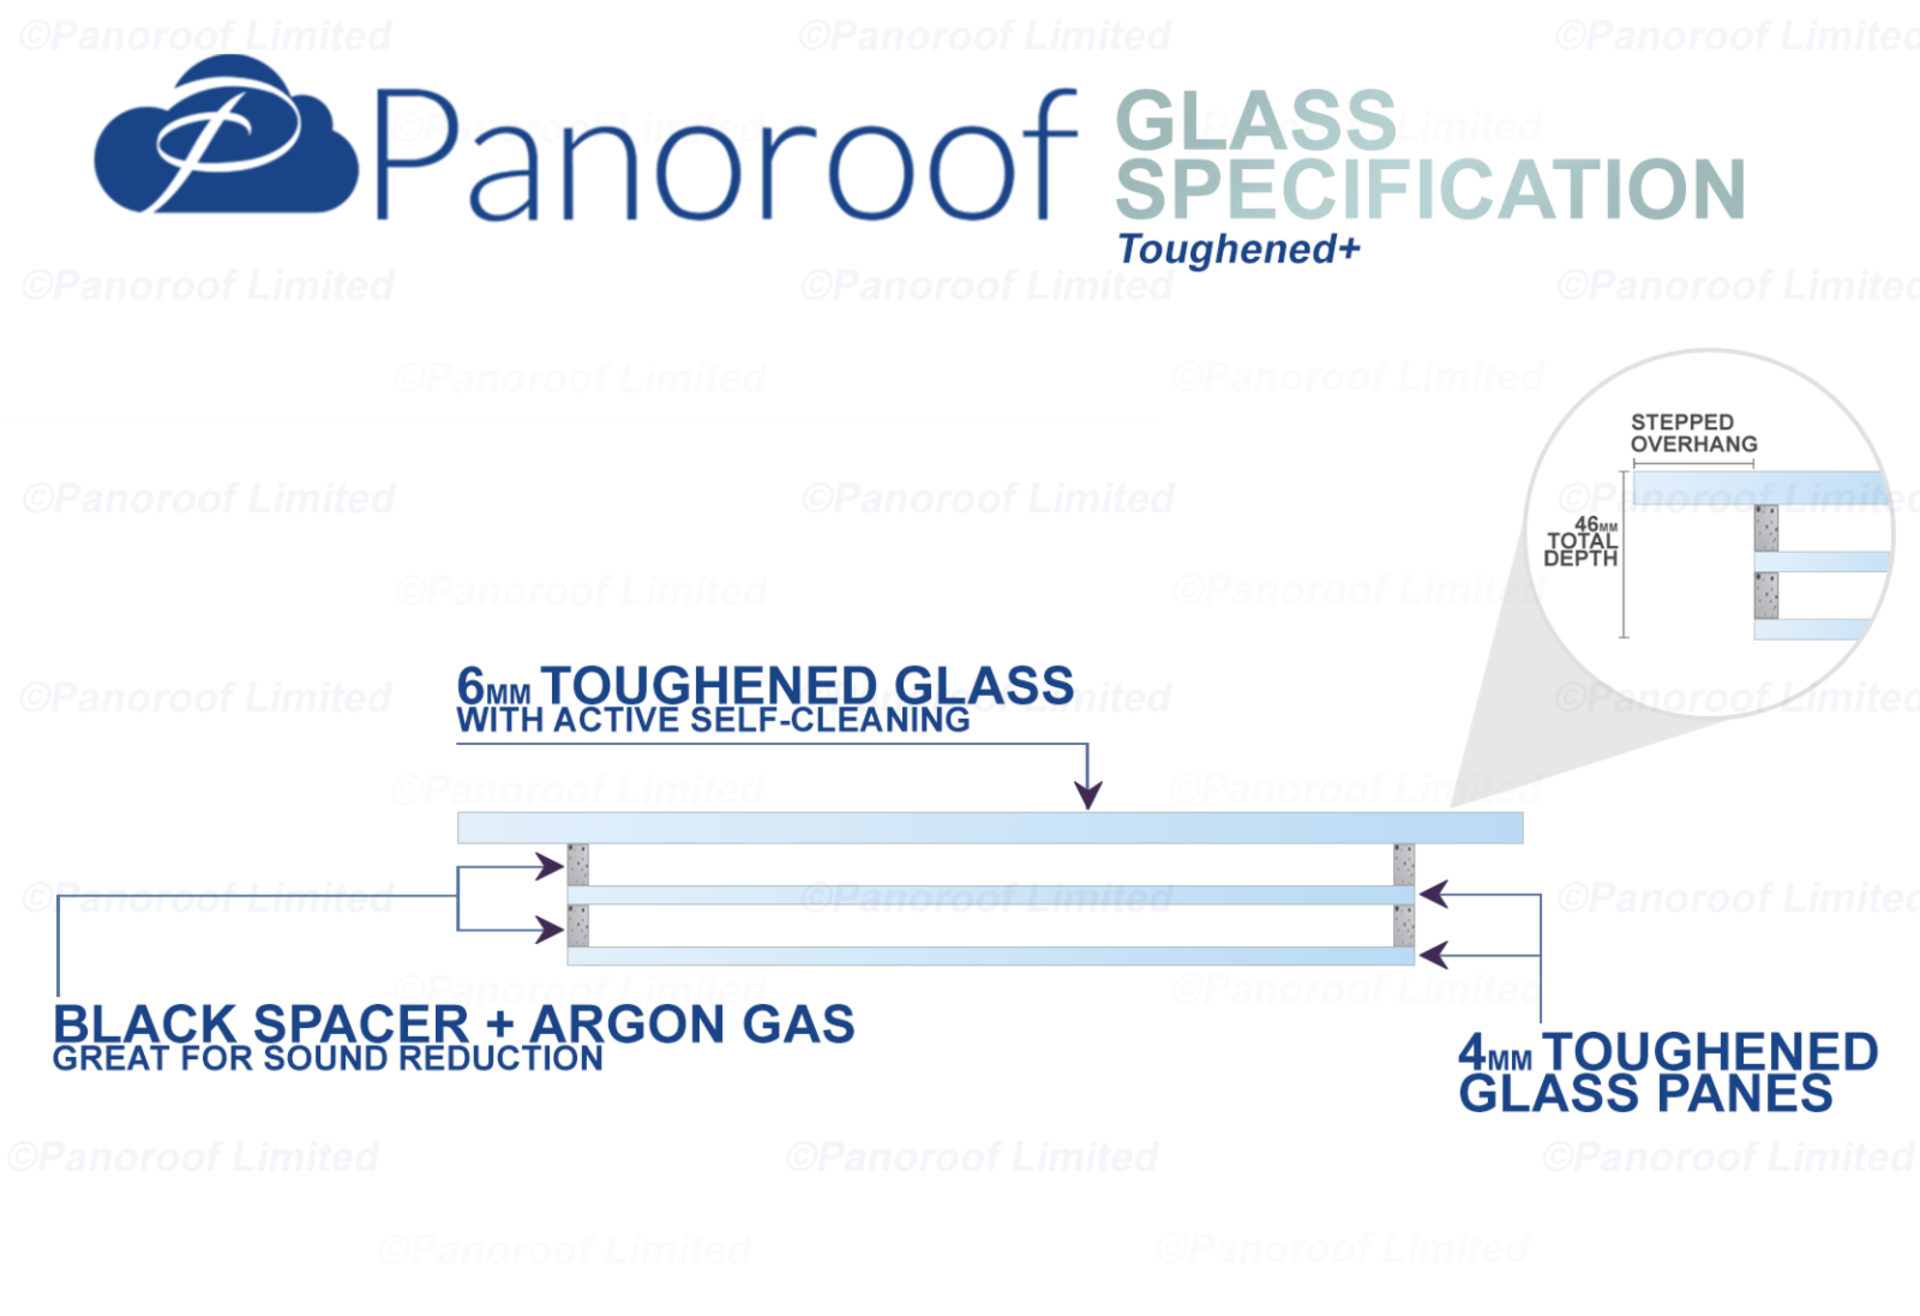 """Panoroof Triple Glazed Self Cleaning 800x2000mm (inside Size Visable glass area) Seamless Glass - Image 5 of 6